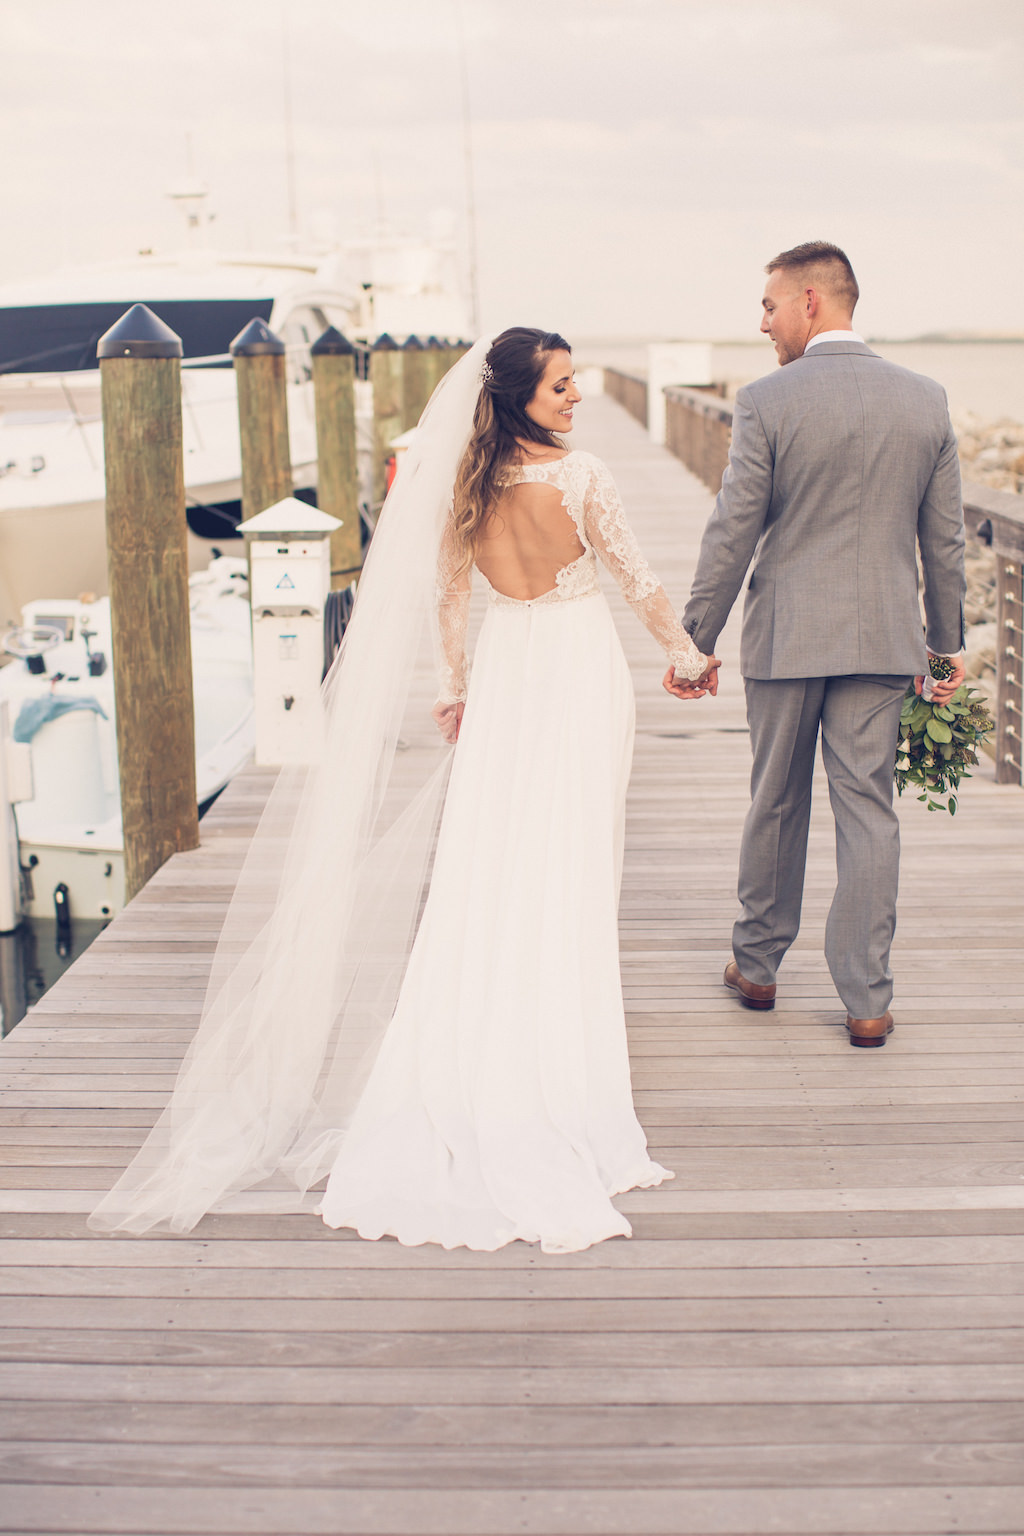 Boho Elegant Inspired South Tampa Bride and Groom on Pier at Sunset Holding Rustic Chic Wedding Bouquet | Tampa Bay Wedding Photographer Luxe Light Photography | Florida Wedding Photographer Luxe Light Images | Wedding Venue Tampa Yacht and Country Club